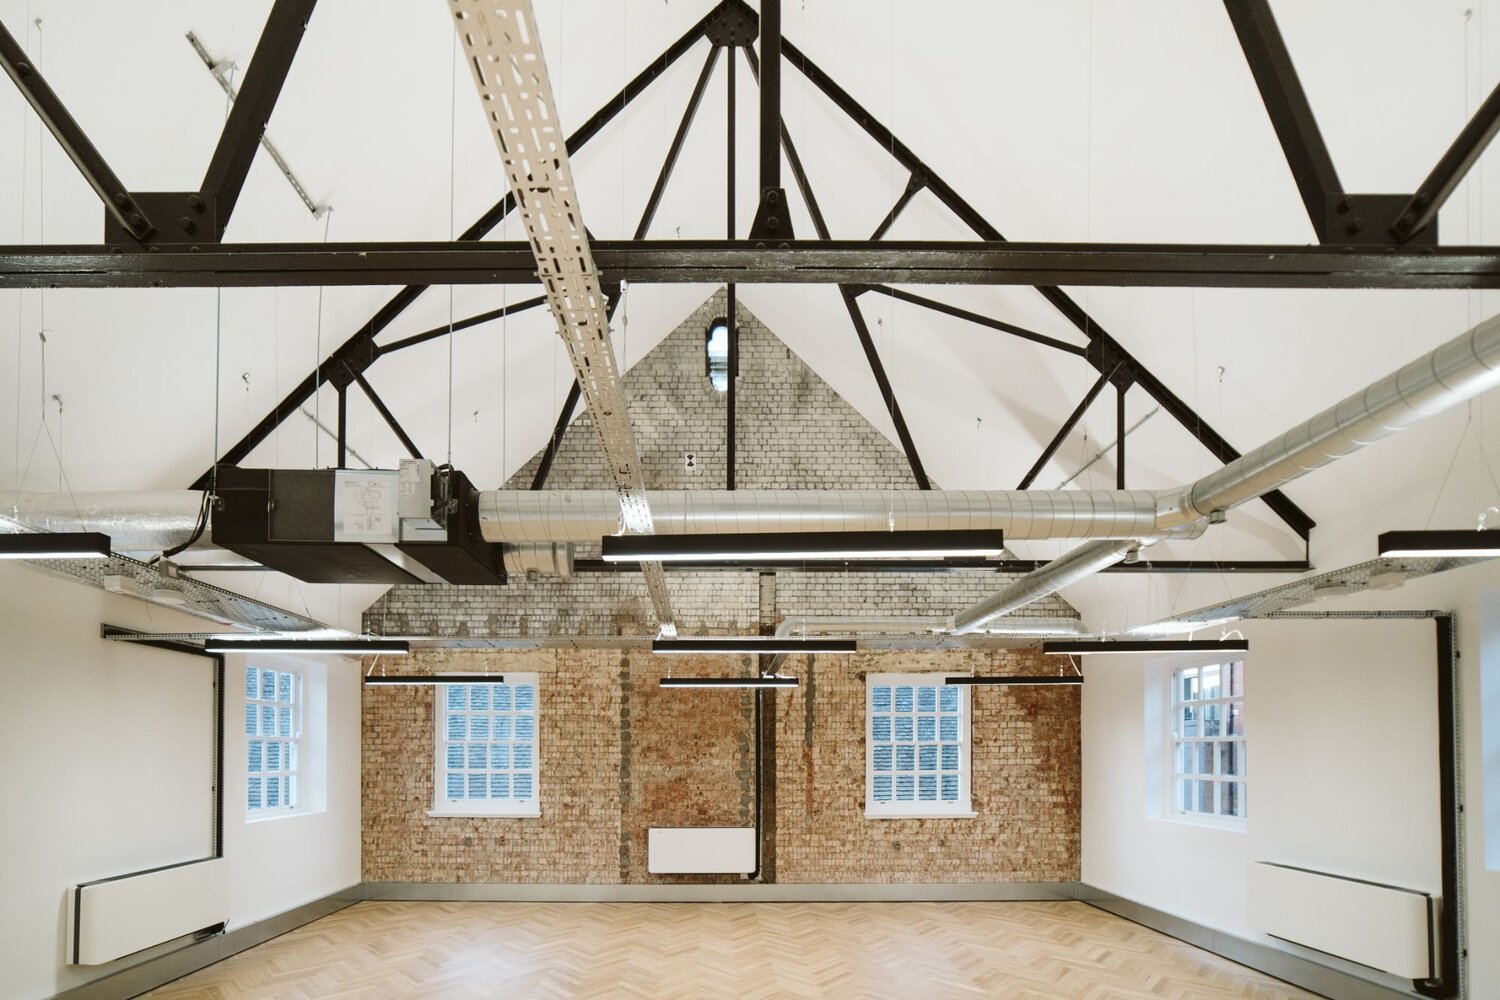 Office and architectural lighting for an office development with exposed ceilings at 13-20 Settles Street, London.